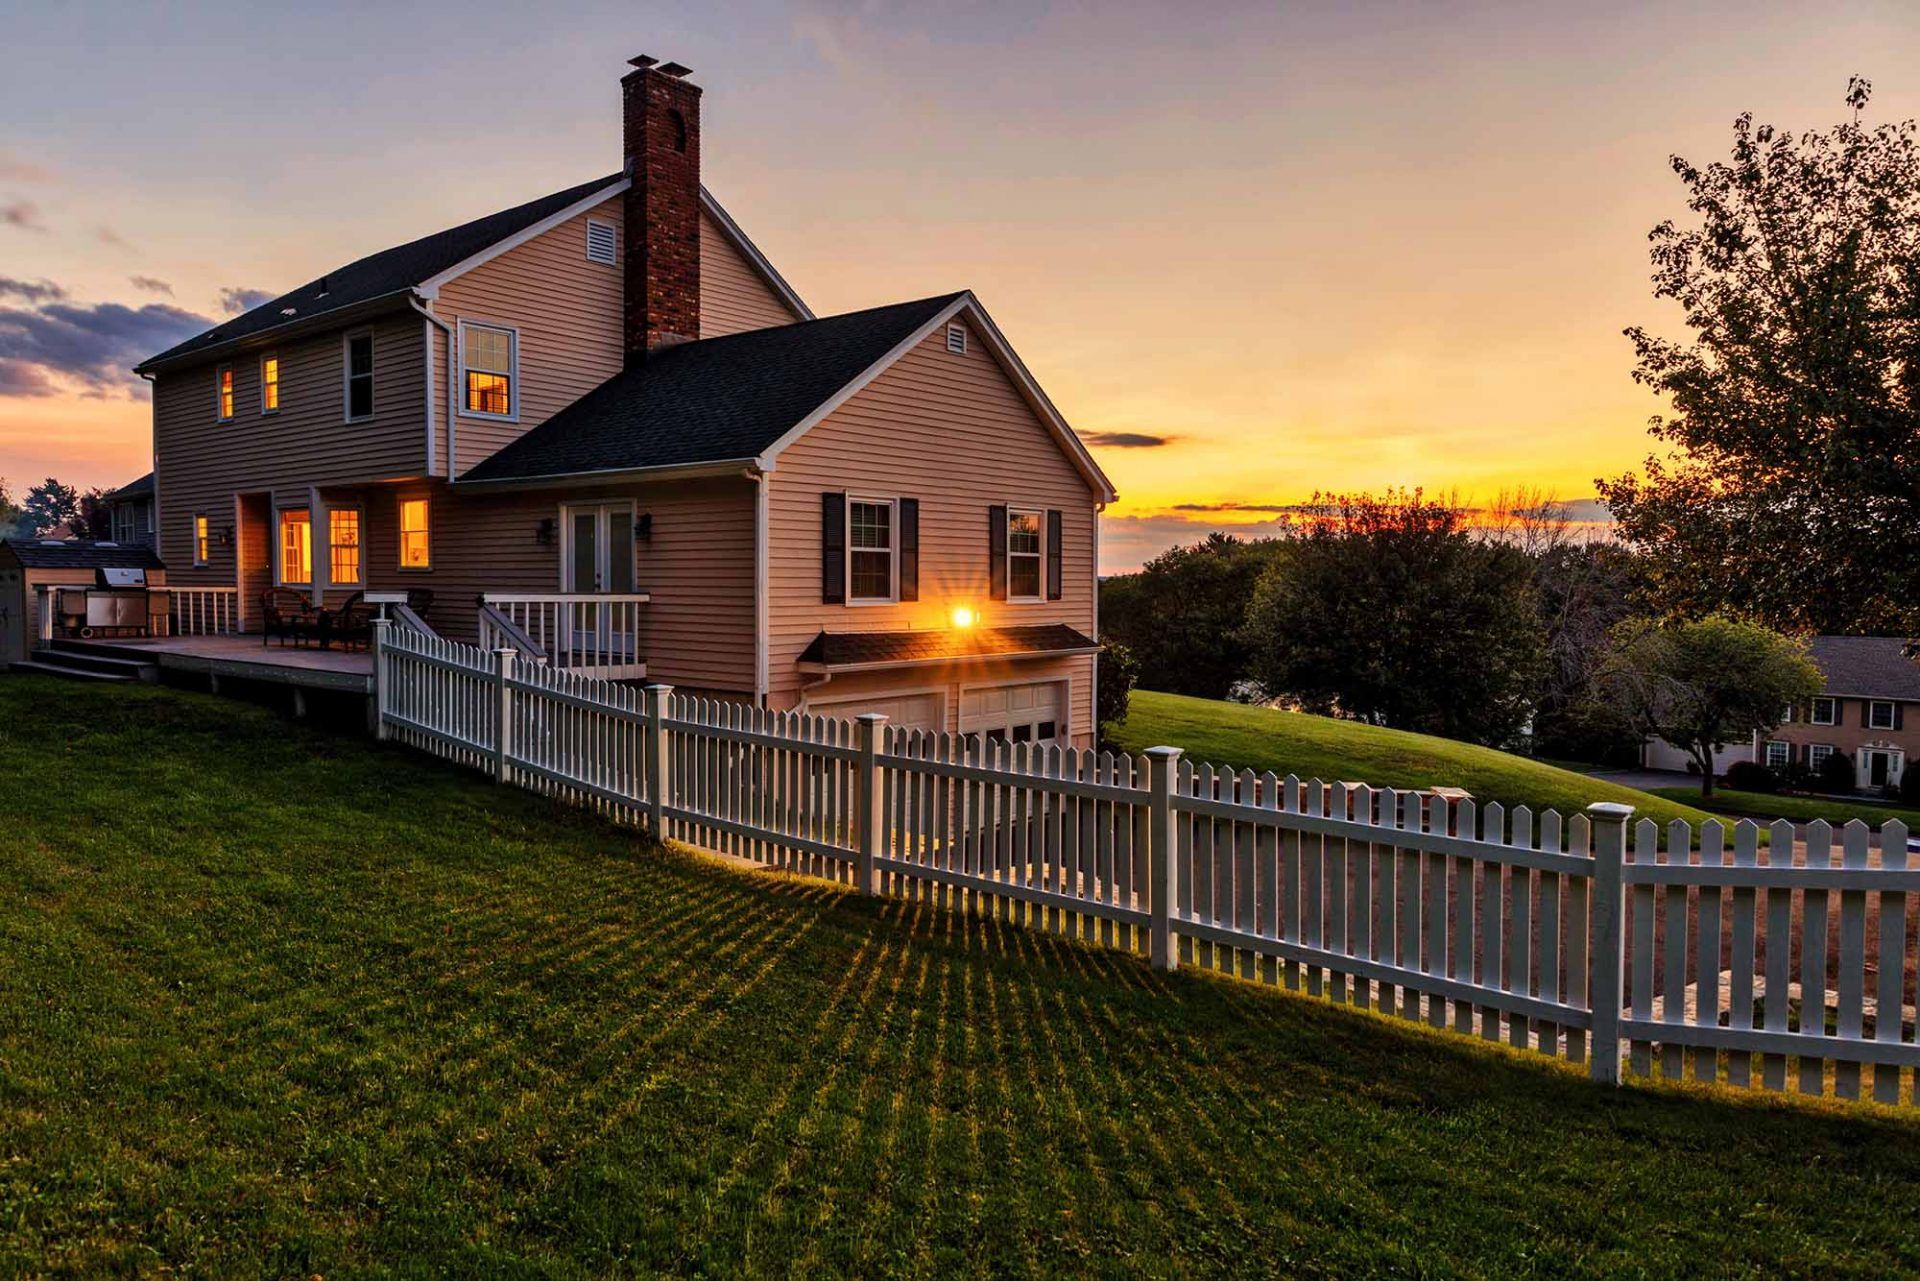 beautiful country house with white fence, green lawn, and sunset on background